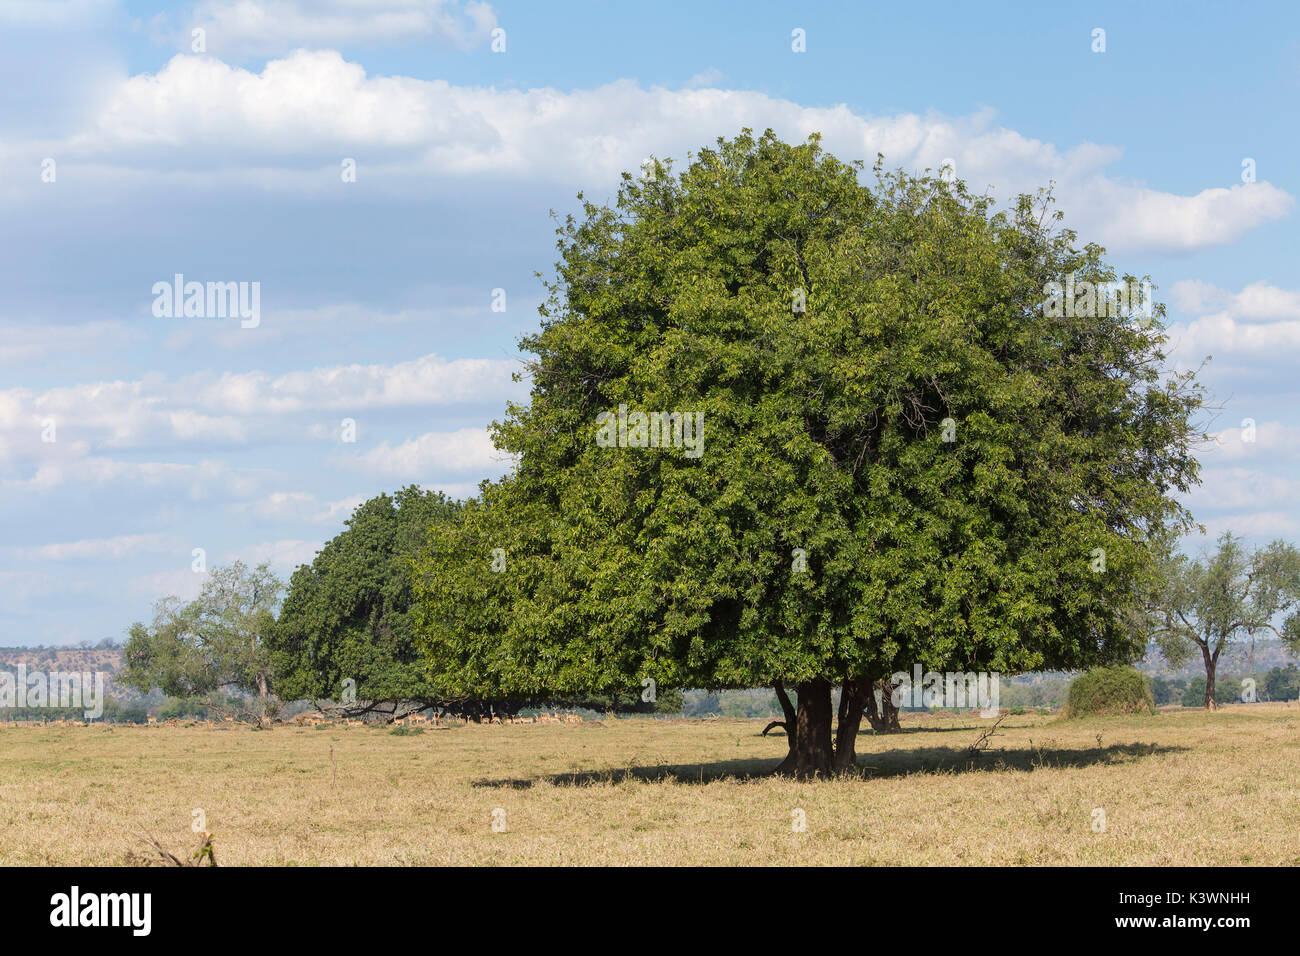 Trichilia emetica trees on the Runde river floodplain showing a sharp, clear browse-line from browsing by kudu and impalas Stock Photo